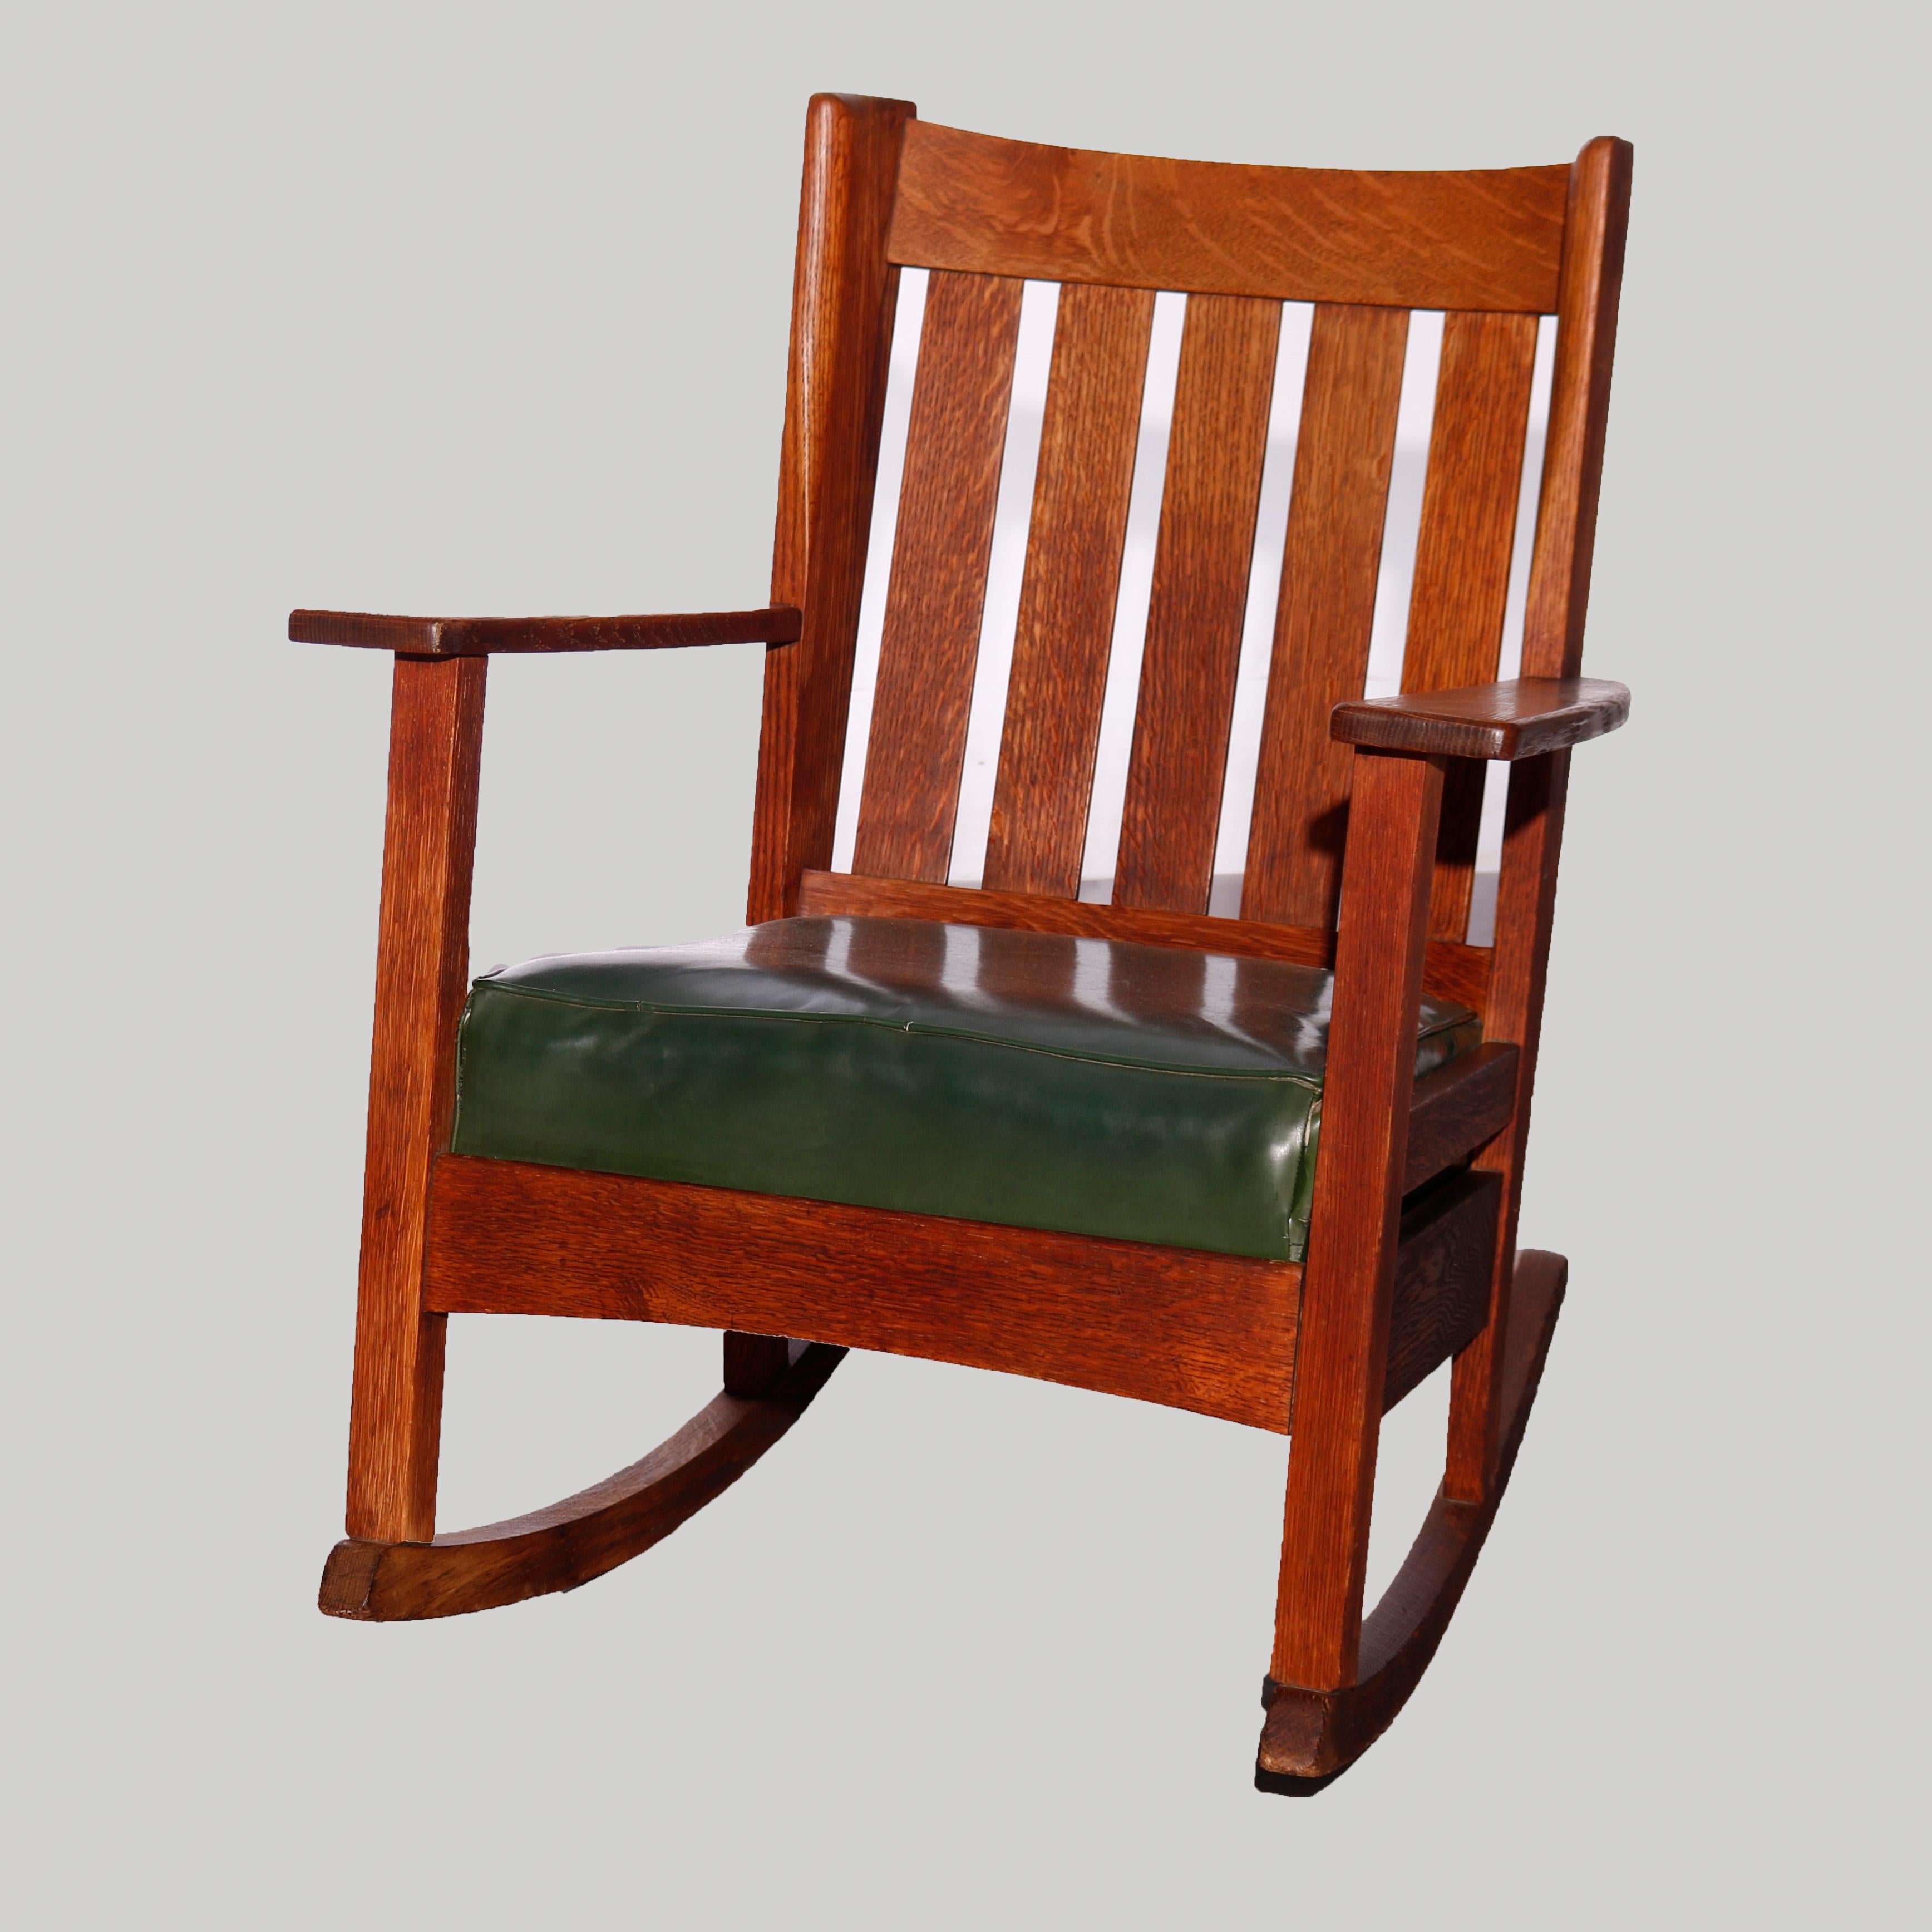 An antique Arts & Crafts Mission set by Stickley Brothers offers wing chair and rocker in oak construction with slat backs and upholstered seats, unsigned, c1910

Measures - rocker 38.5''H x 27.5''W x 24.25''D, seat height 15 1/4